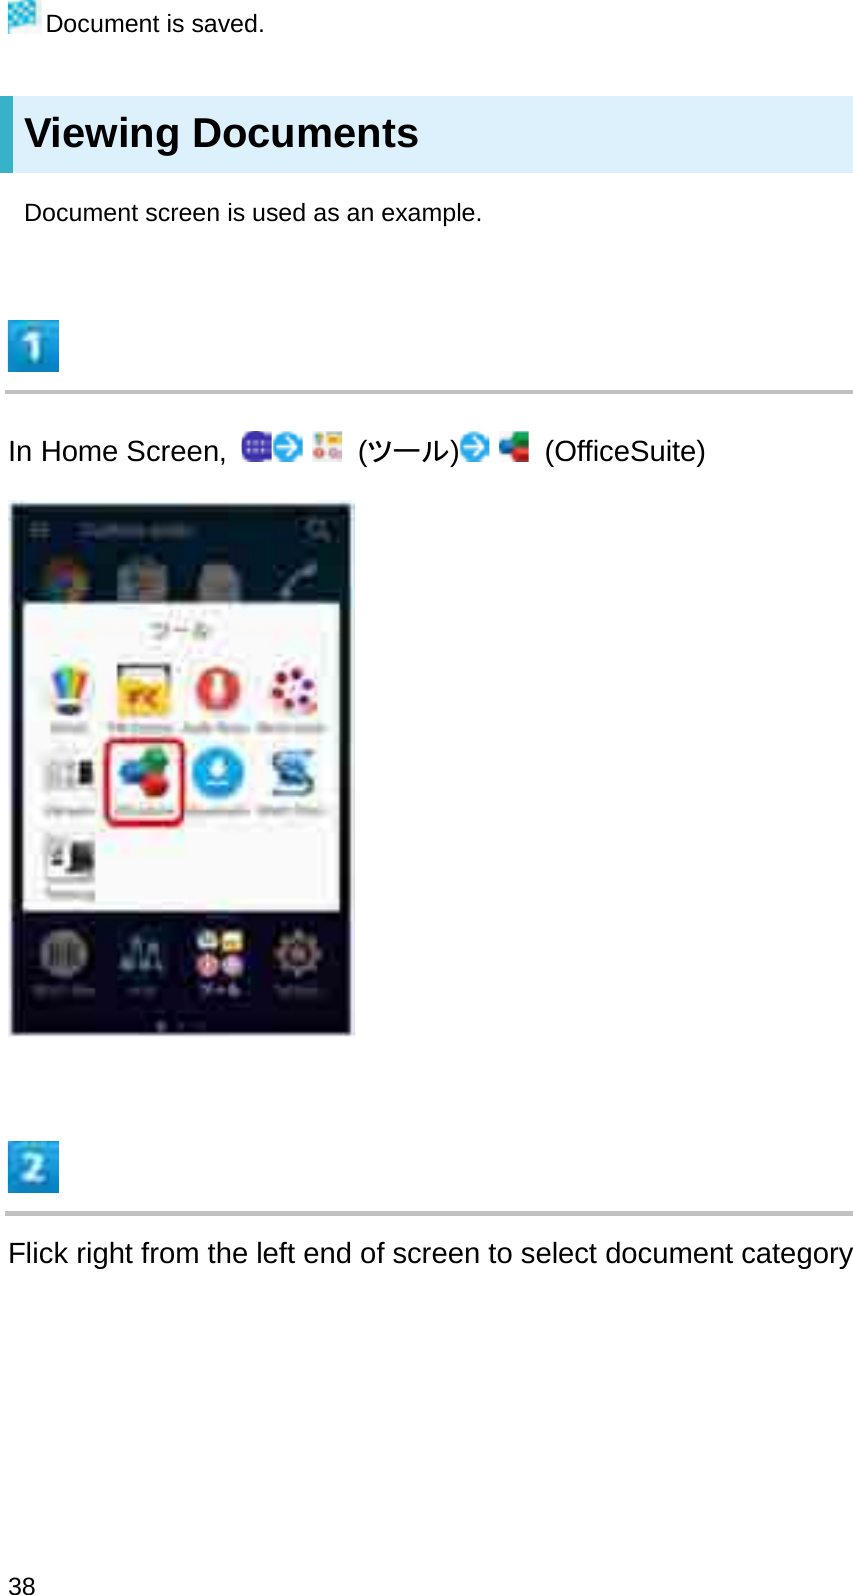 Document is saved.Viewing DocumentsDocument screen is used as an example.In Home Screen,  (䝒䞊䝹)(OfficeSuite)Flick right from the left end of screen to select document category38